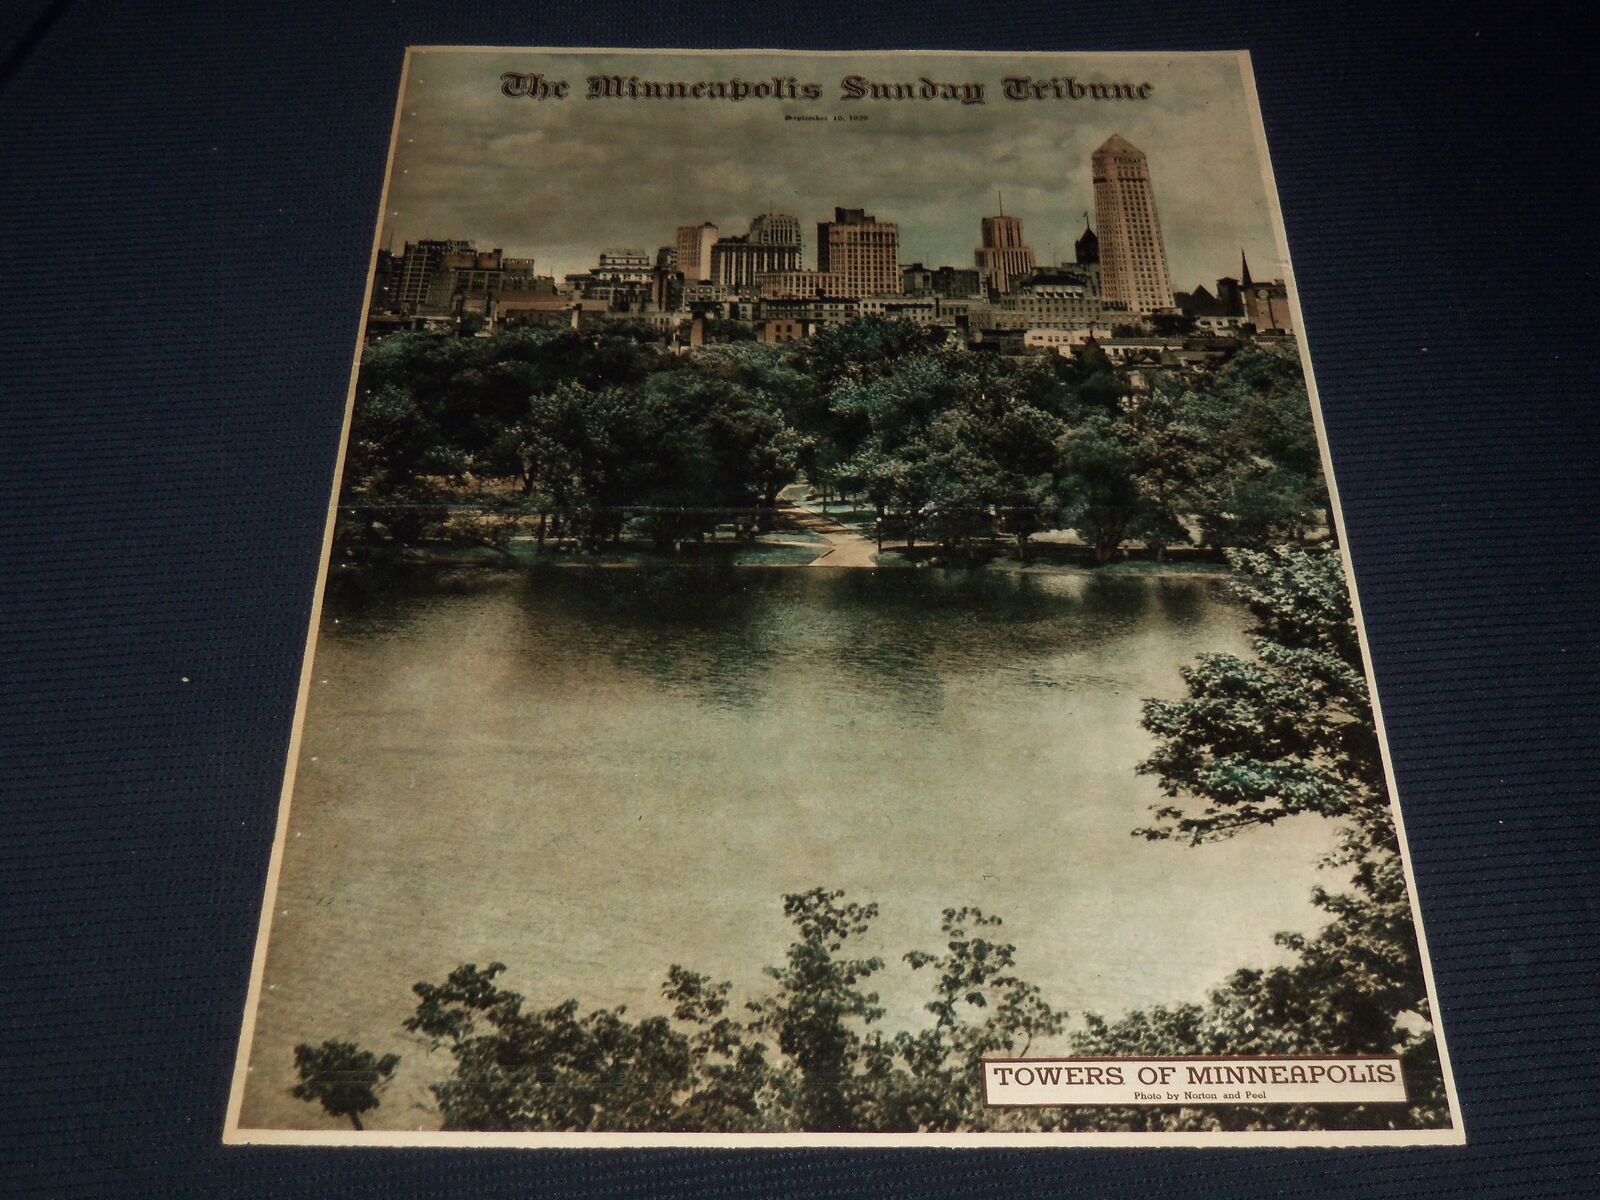 1939 SEPT 10 MINNEAPOLIS SUNDAY TRIBUNE COLOR SECTION - TOWERS OF MINN - NT 9580